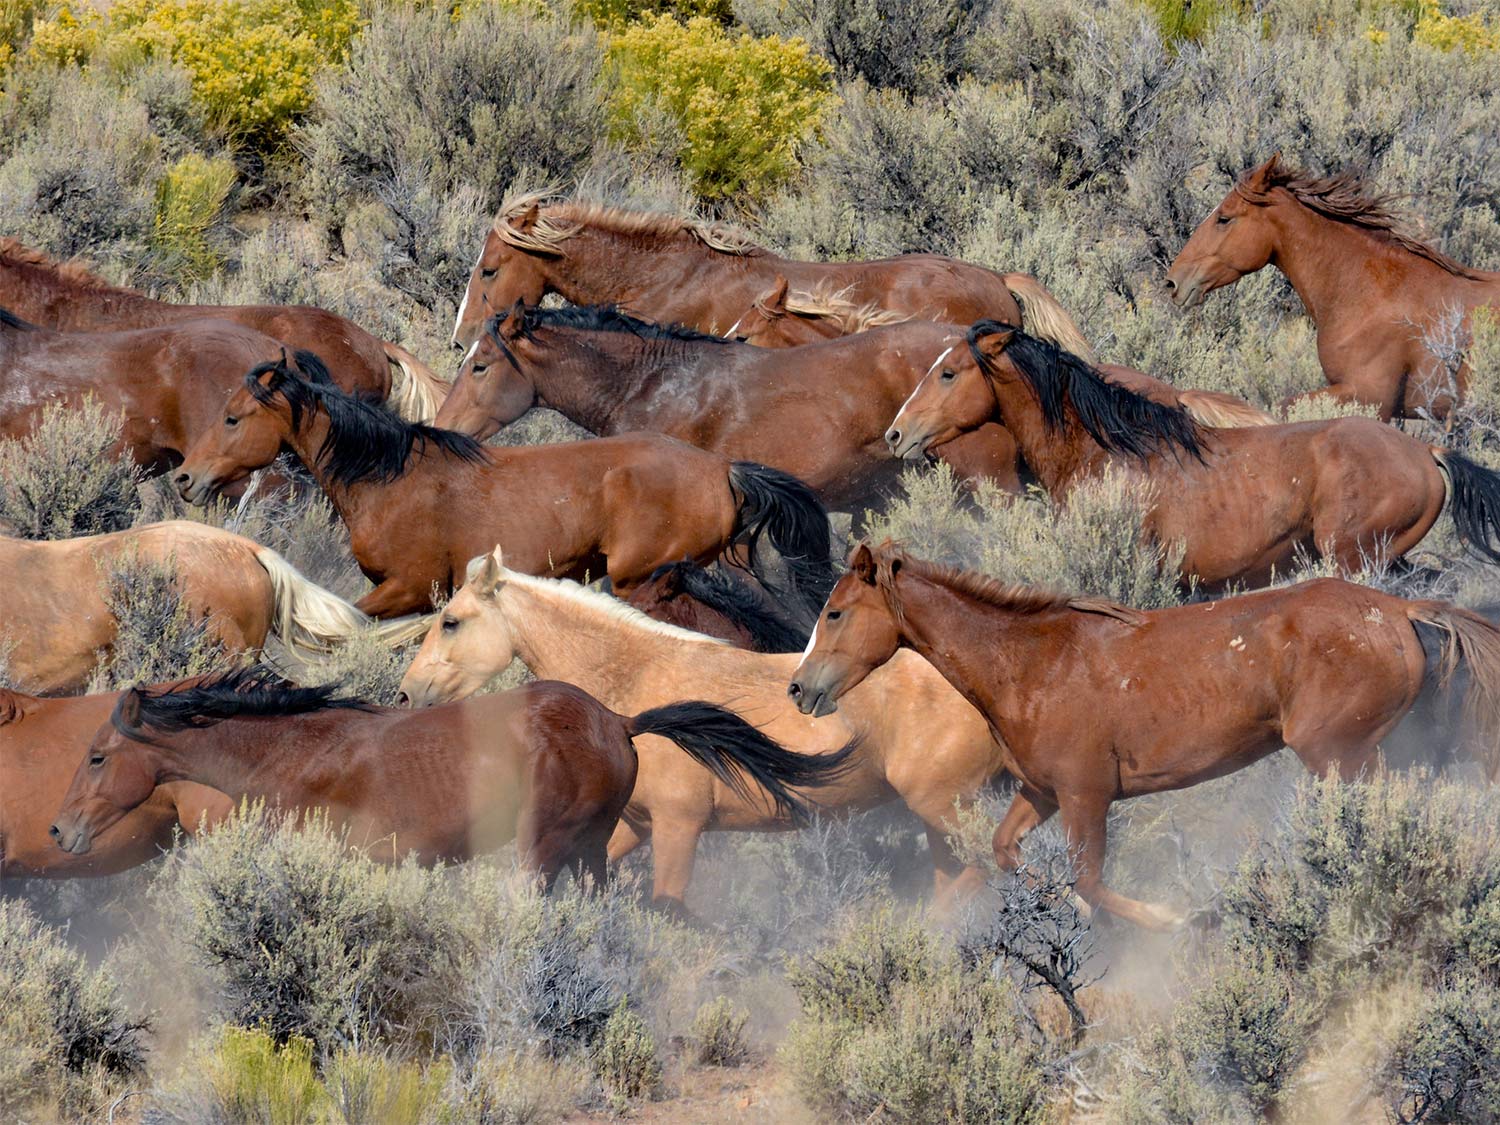 A herd of wild horses stampede across the open brush and plains.